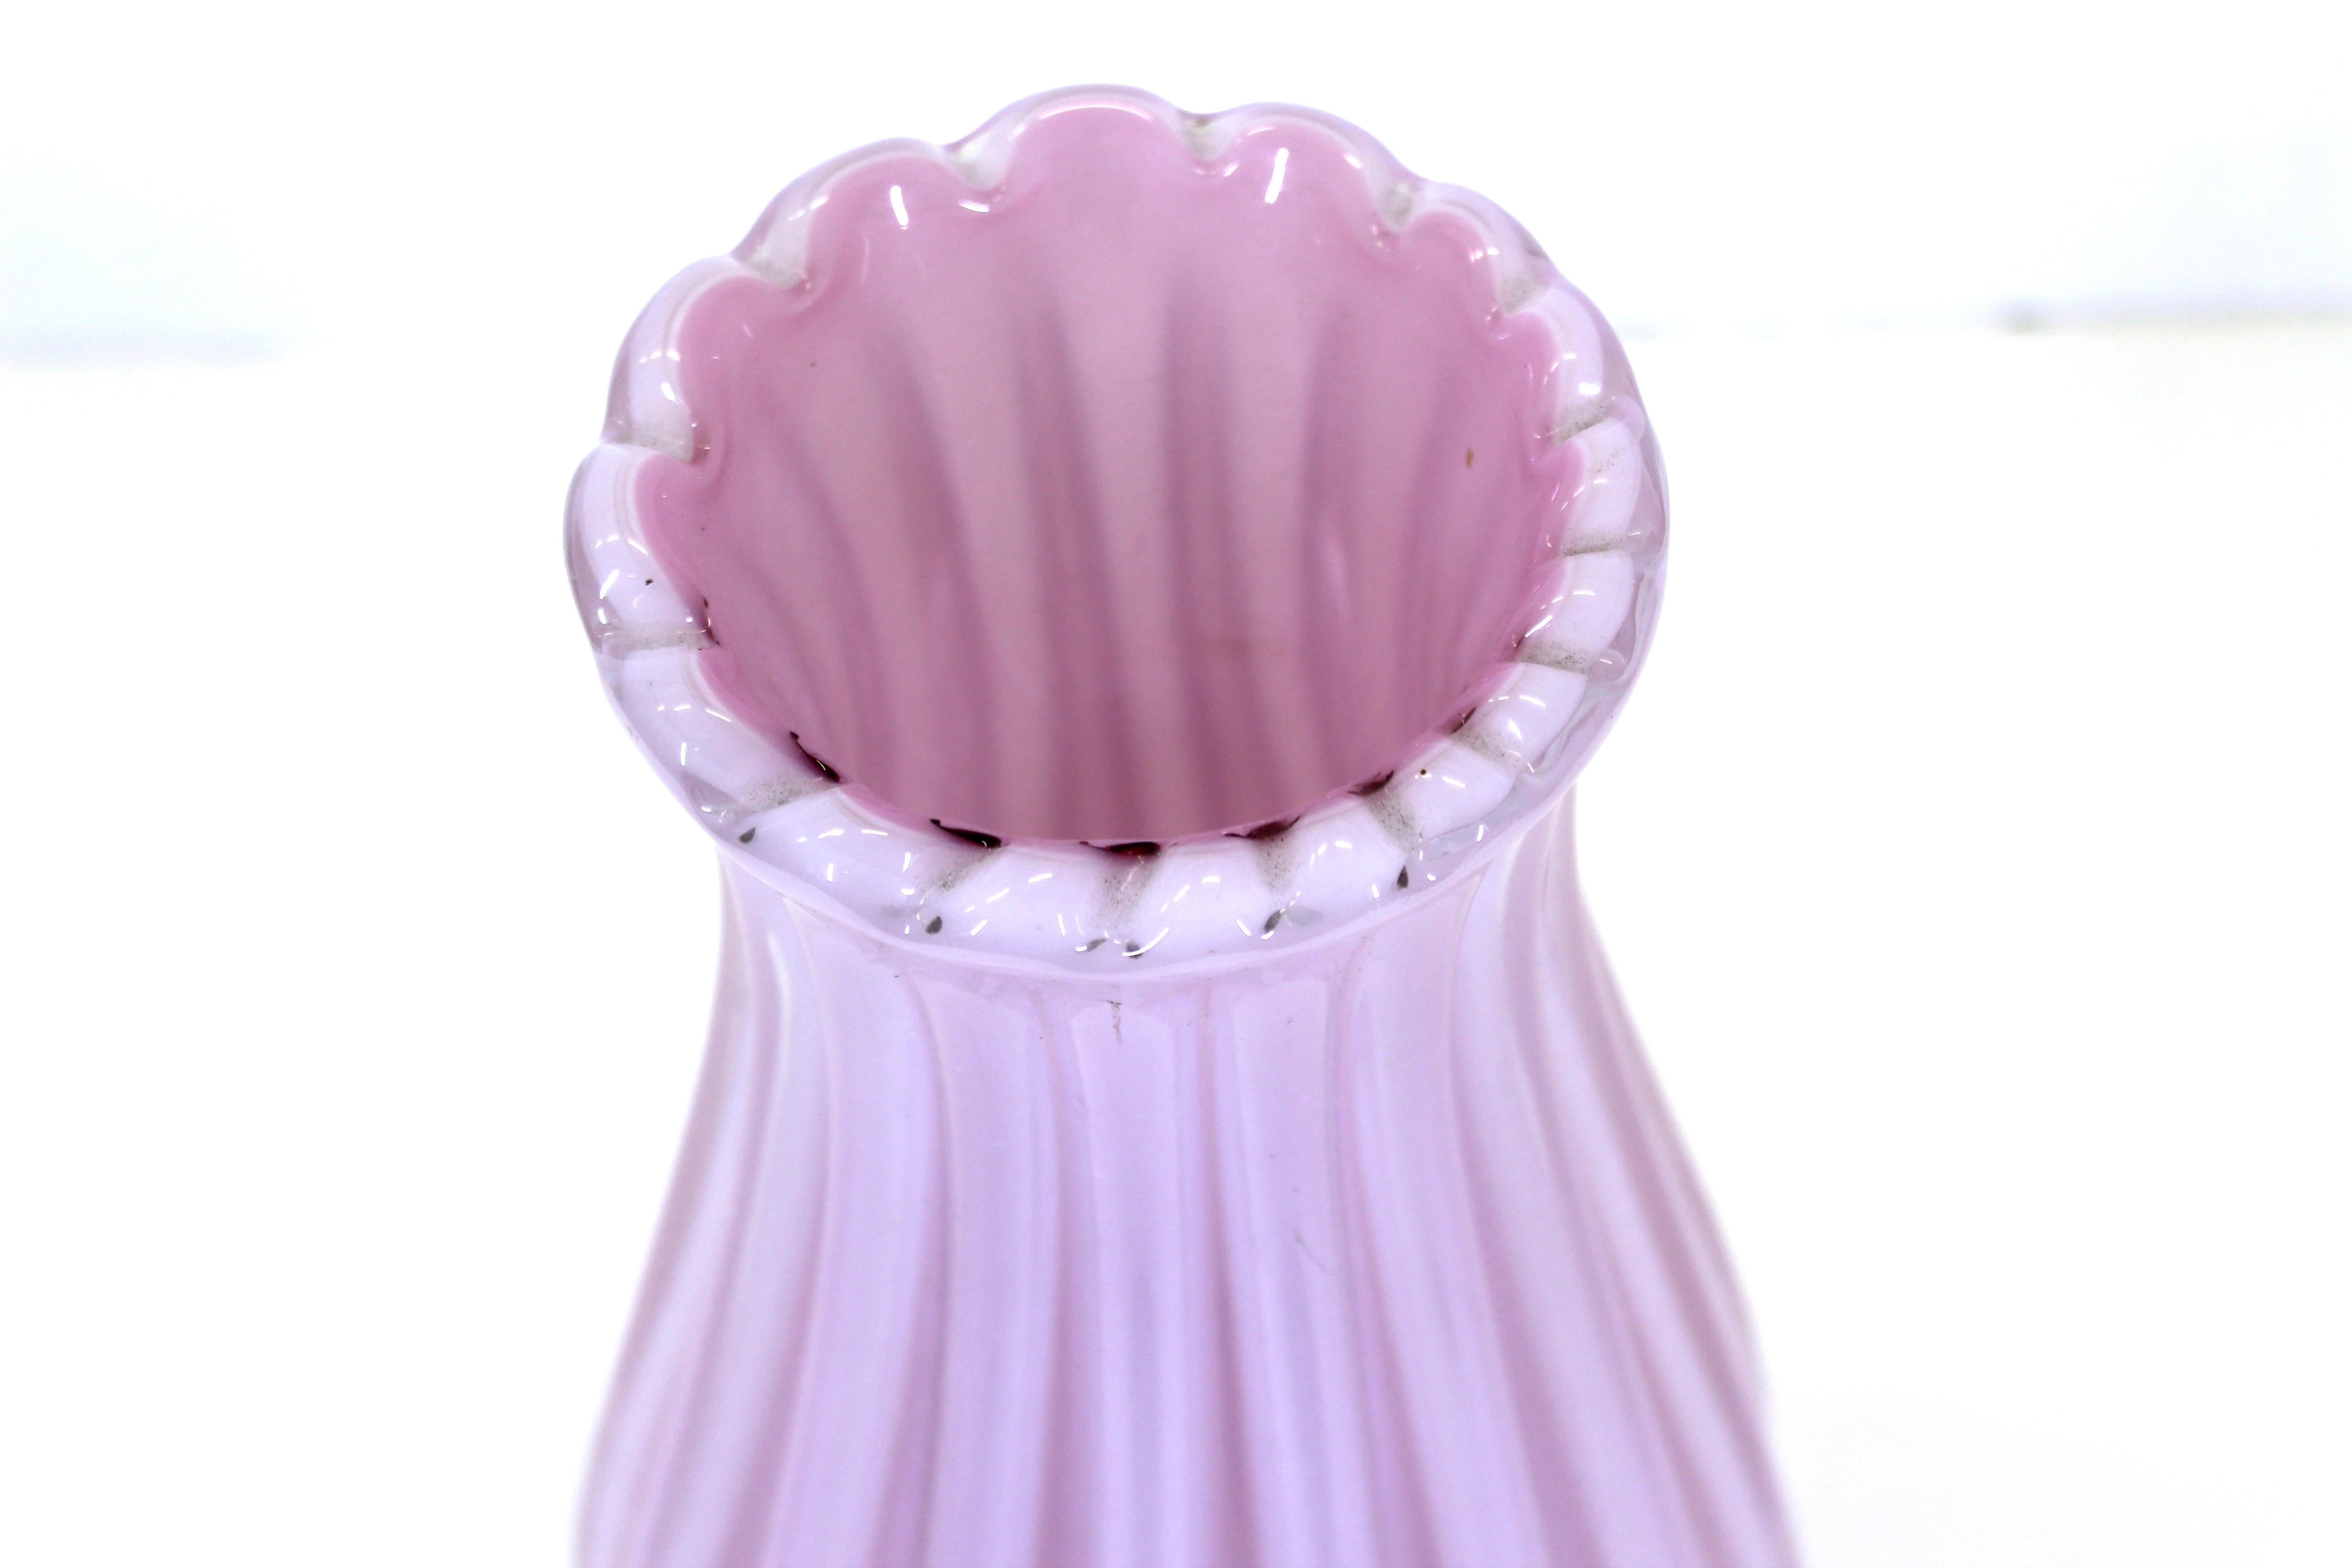 Mid-20th Century Archimede Seguso Pink Vase in Channeled Murano Glass